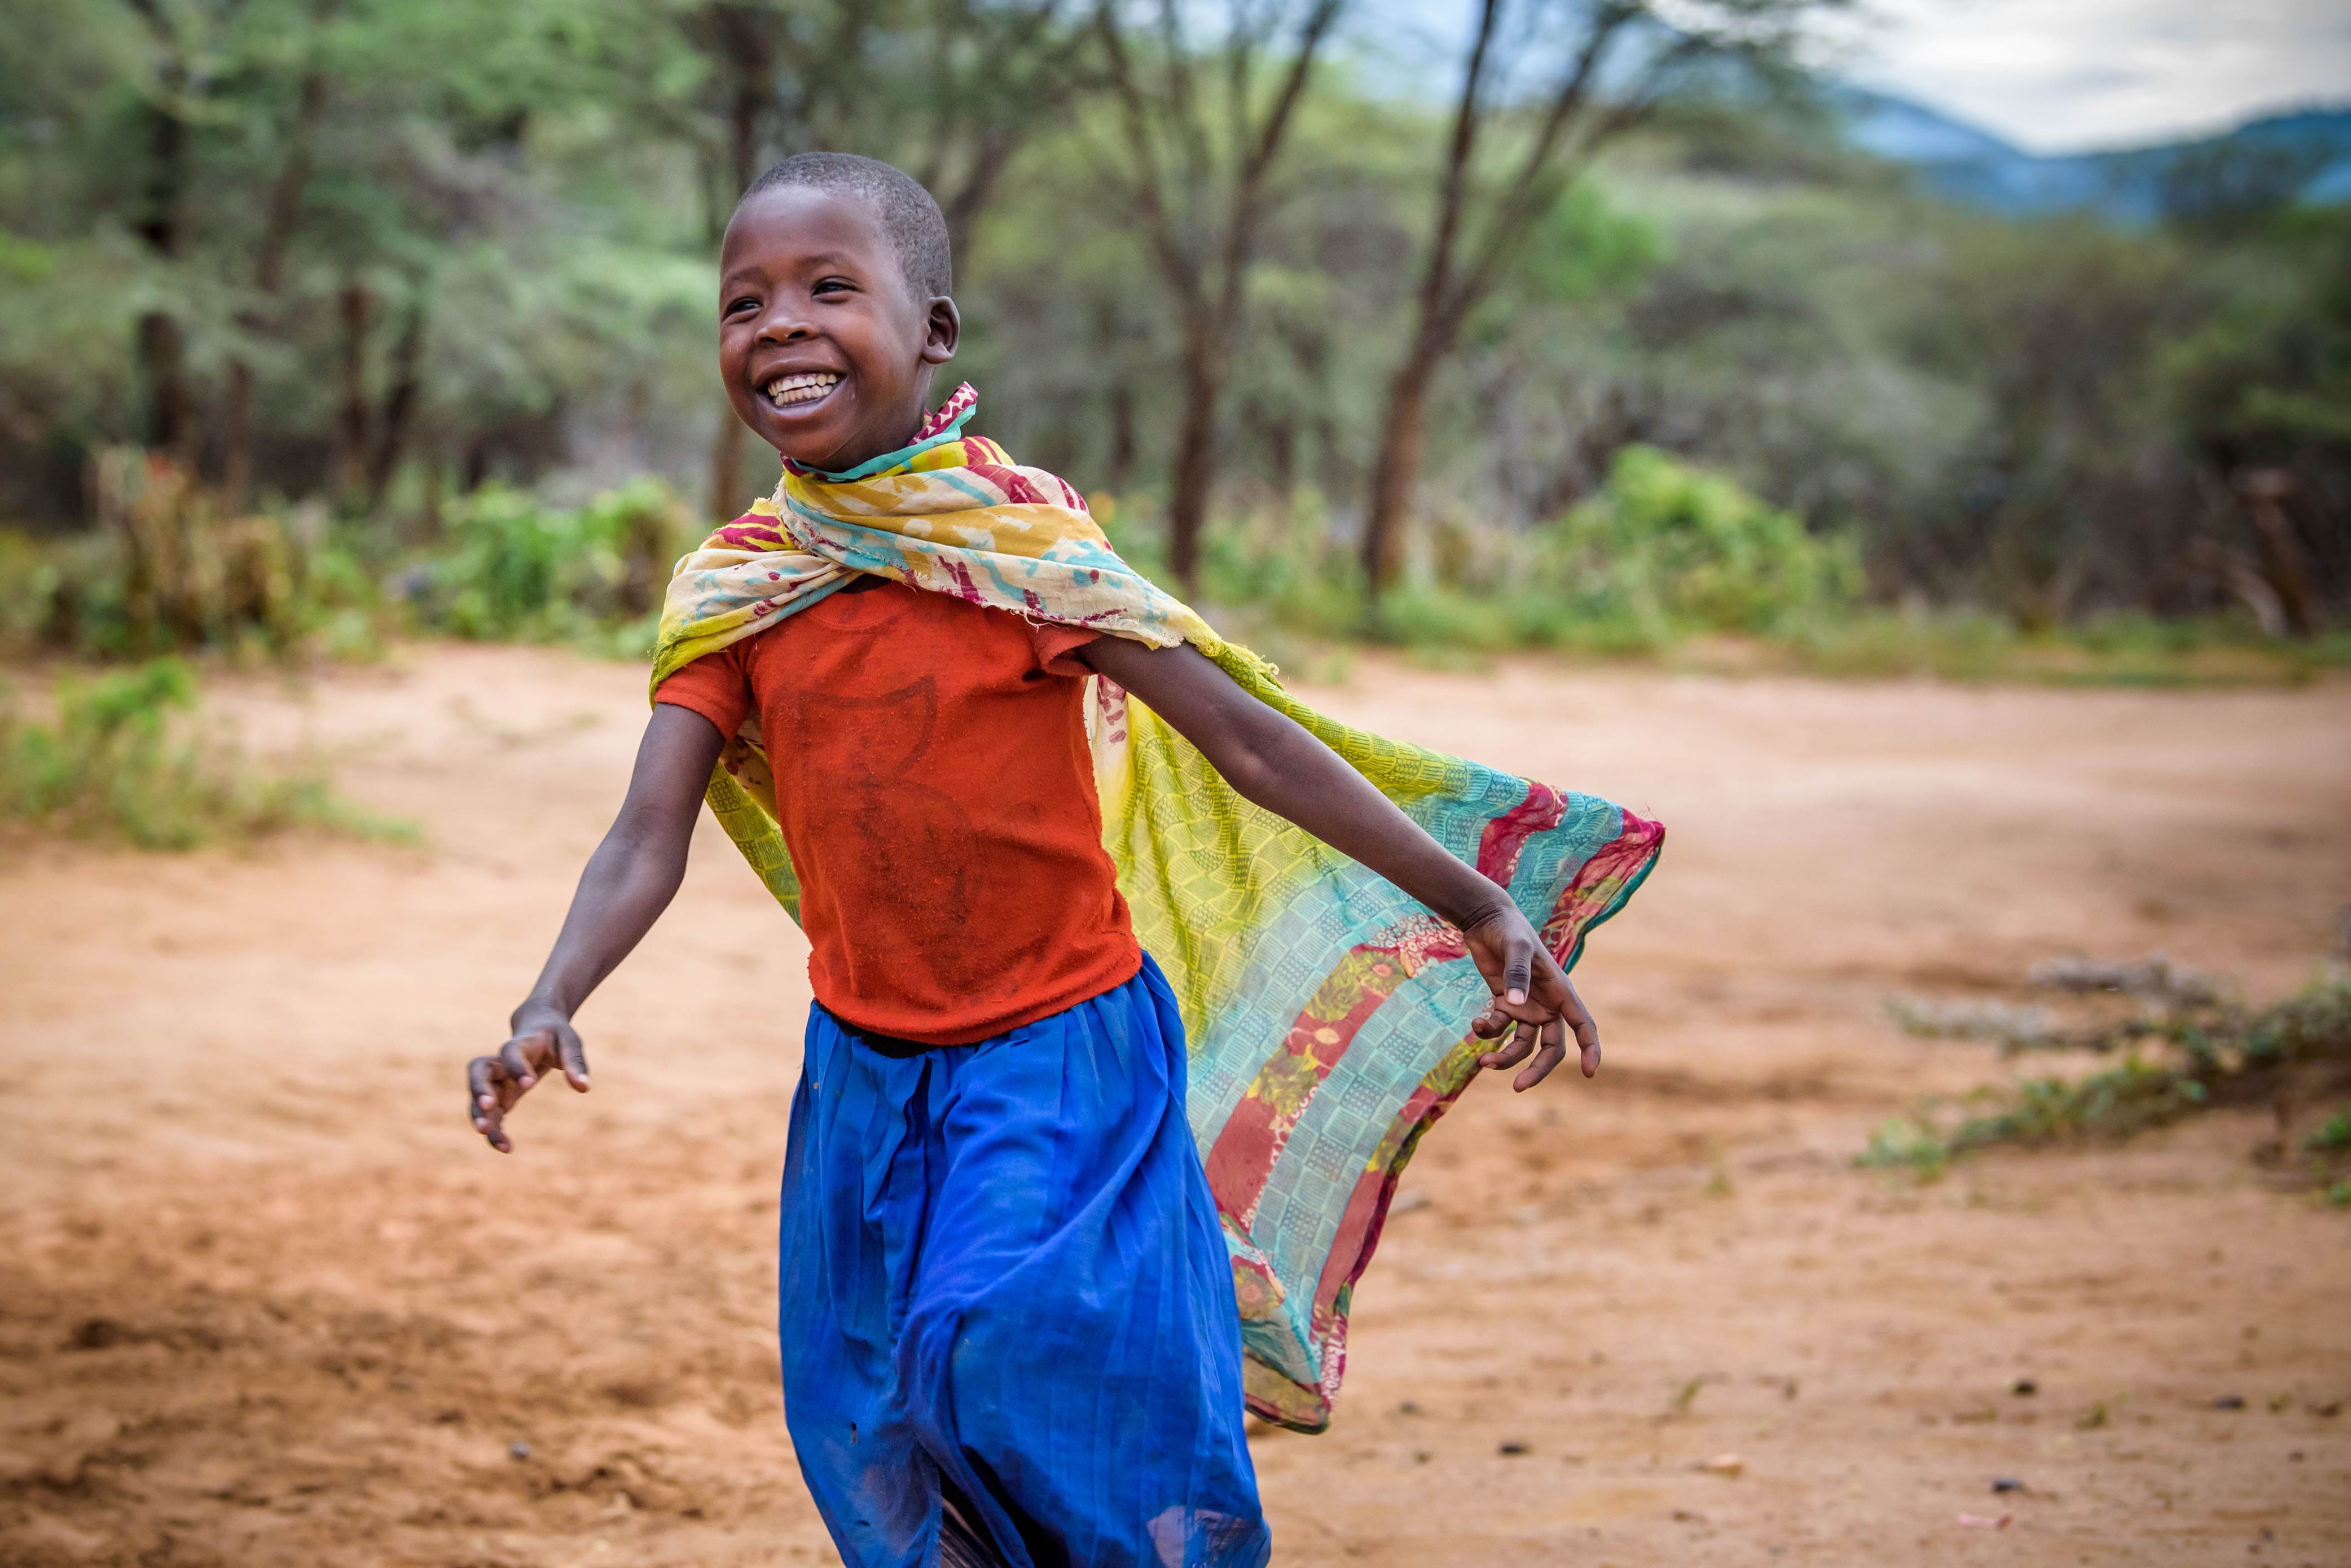 Cheru from Kenya runs outside, smiling because she no longer needs to walk for miles each day to collect water